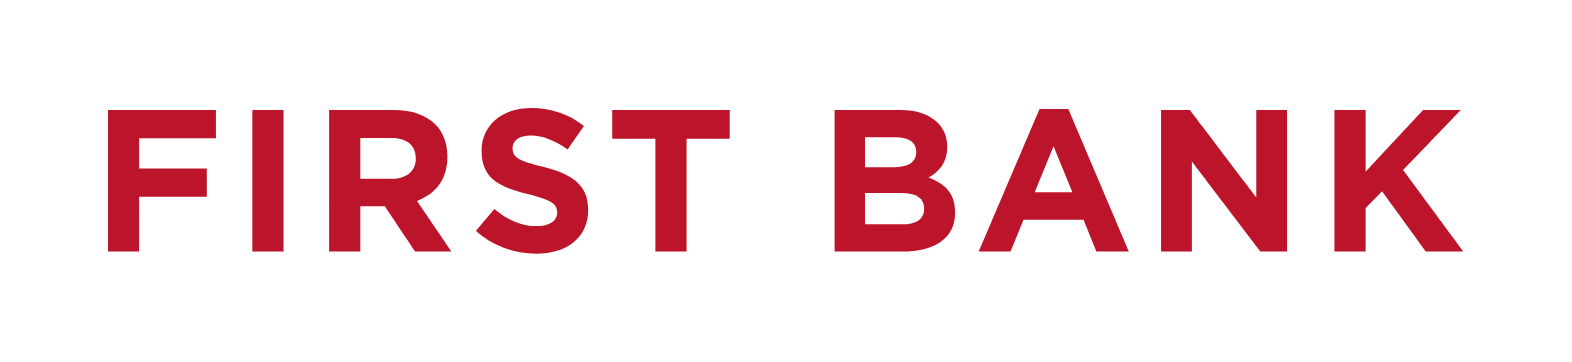 First Bancorp
 logo large for dark backgrounds (transparent PNG)